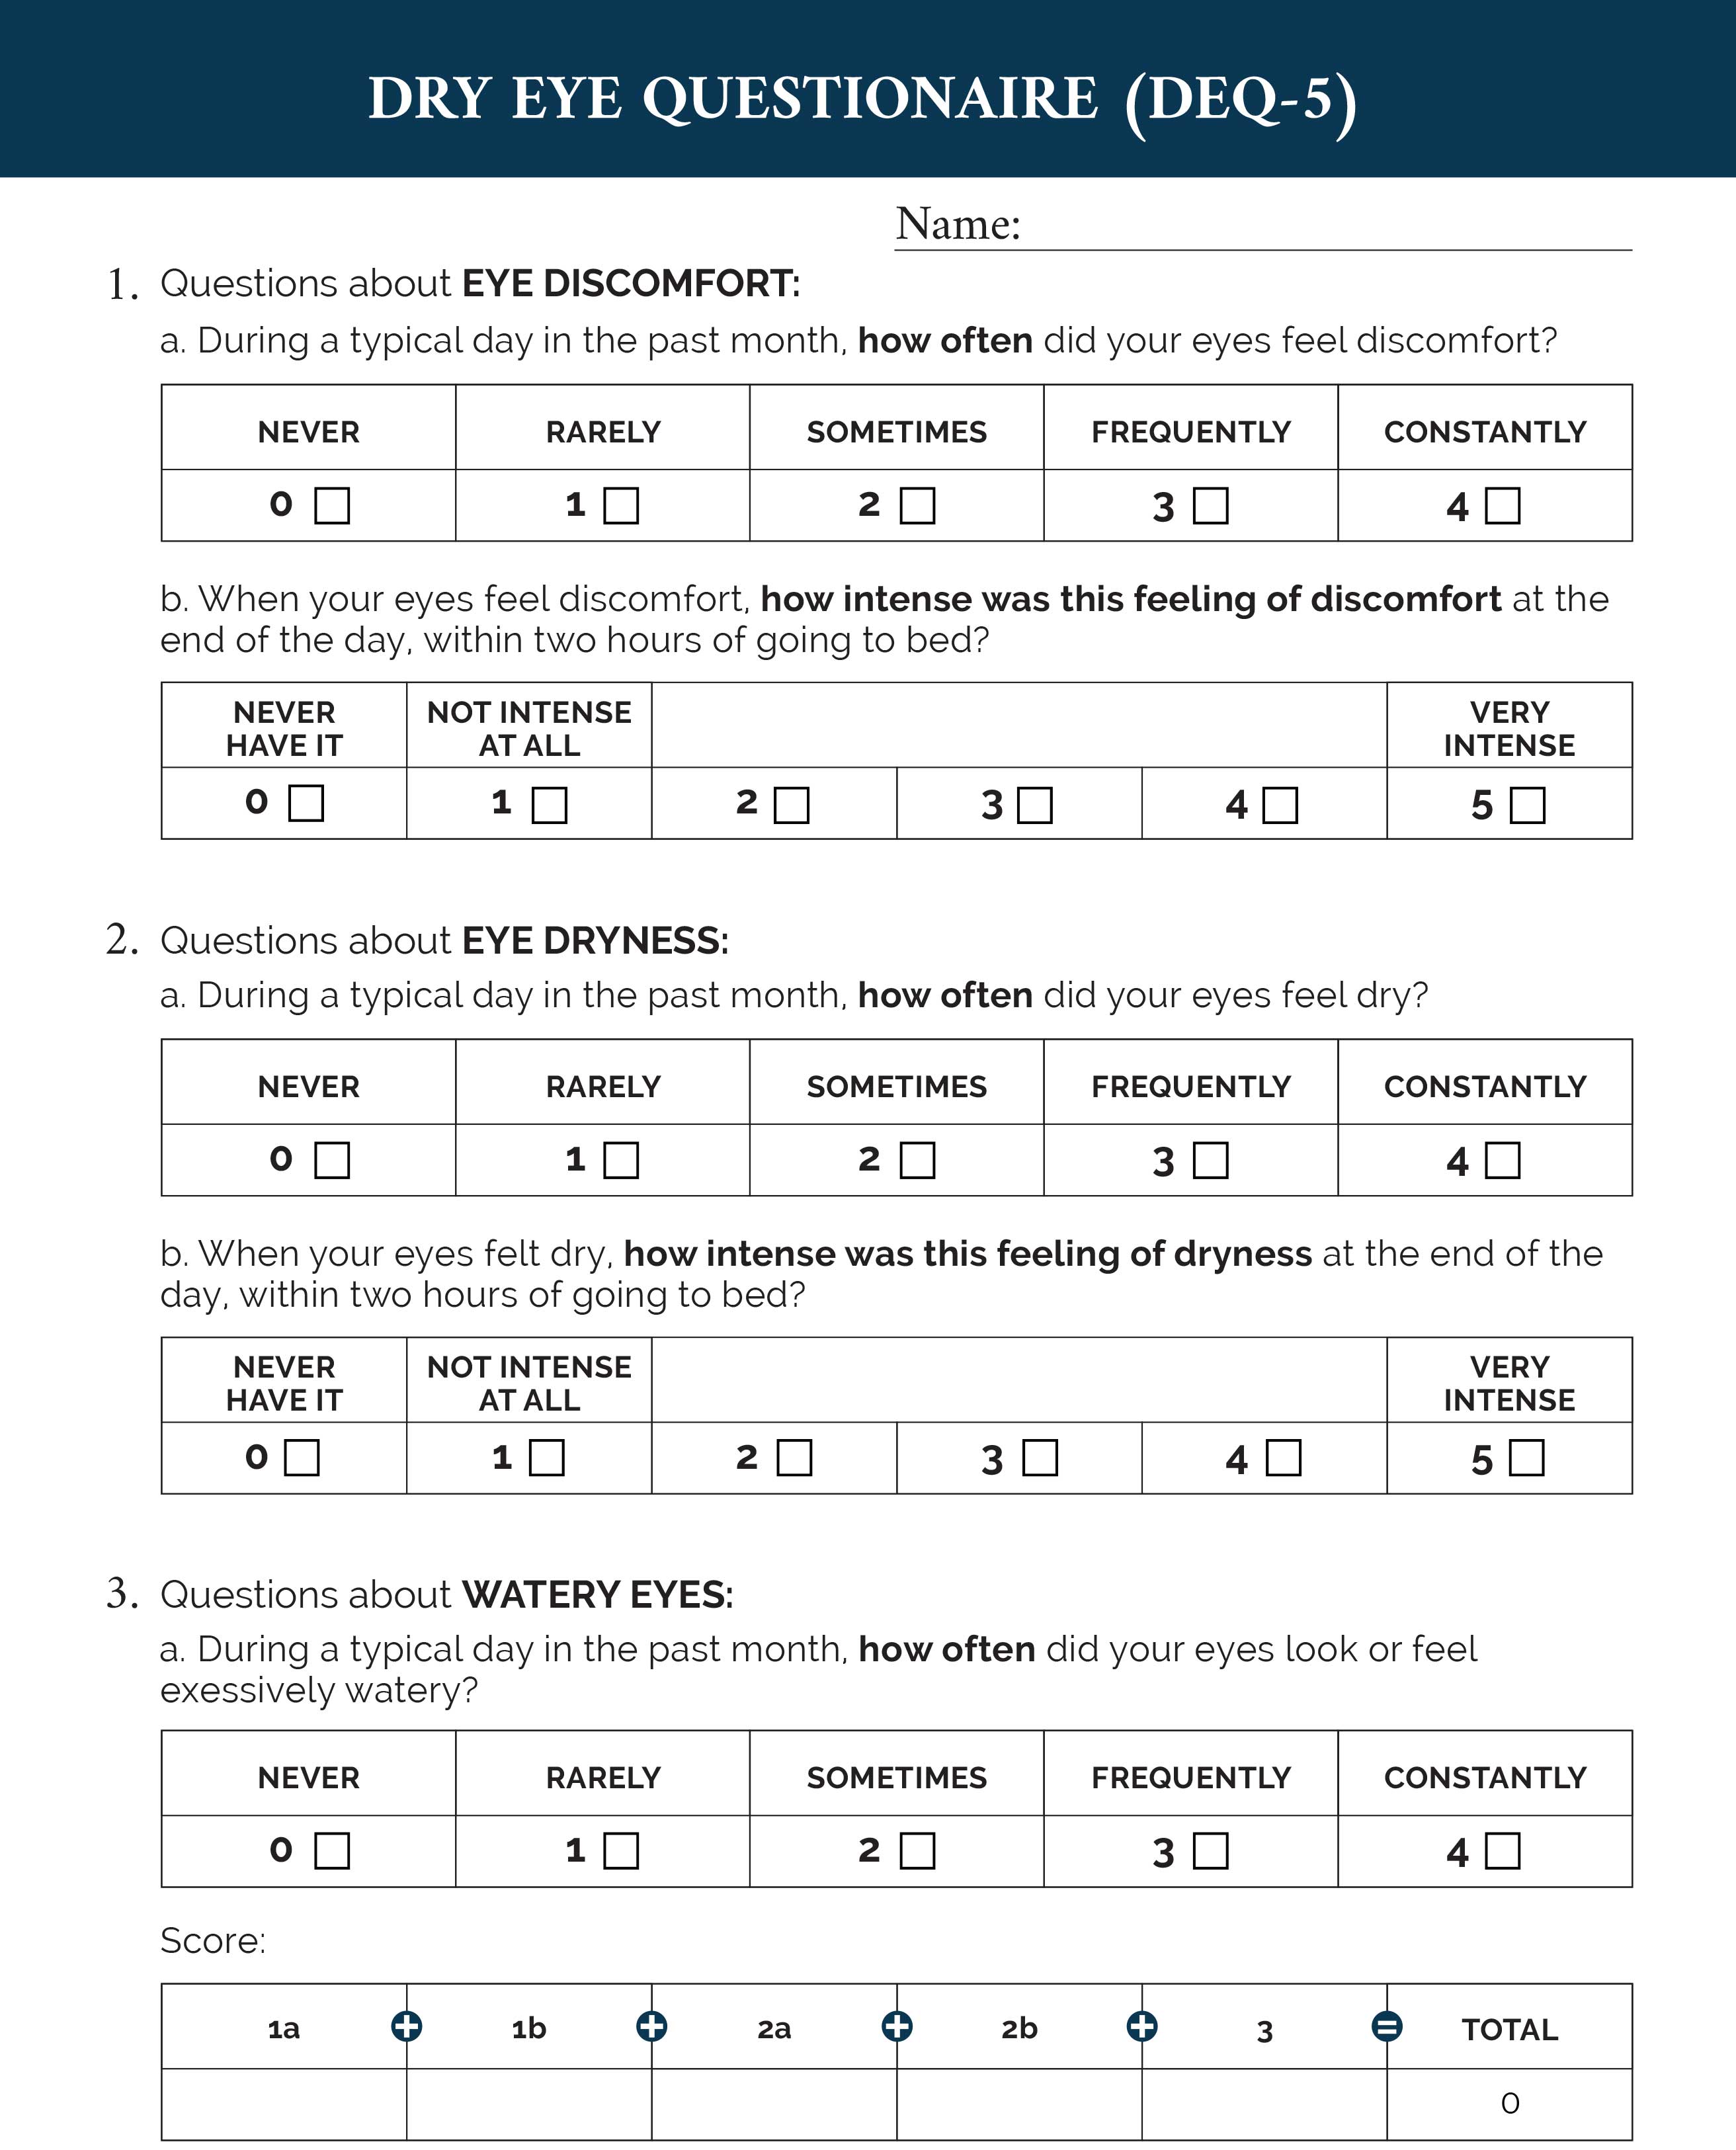 The DEQ-5 Questionnaire is a shorter version of the DEQ, which has long been used as a valid measurement of dry eye symptom frequency and severity.